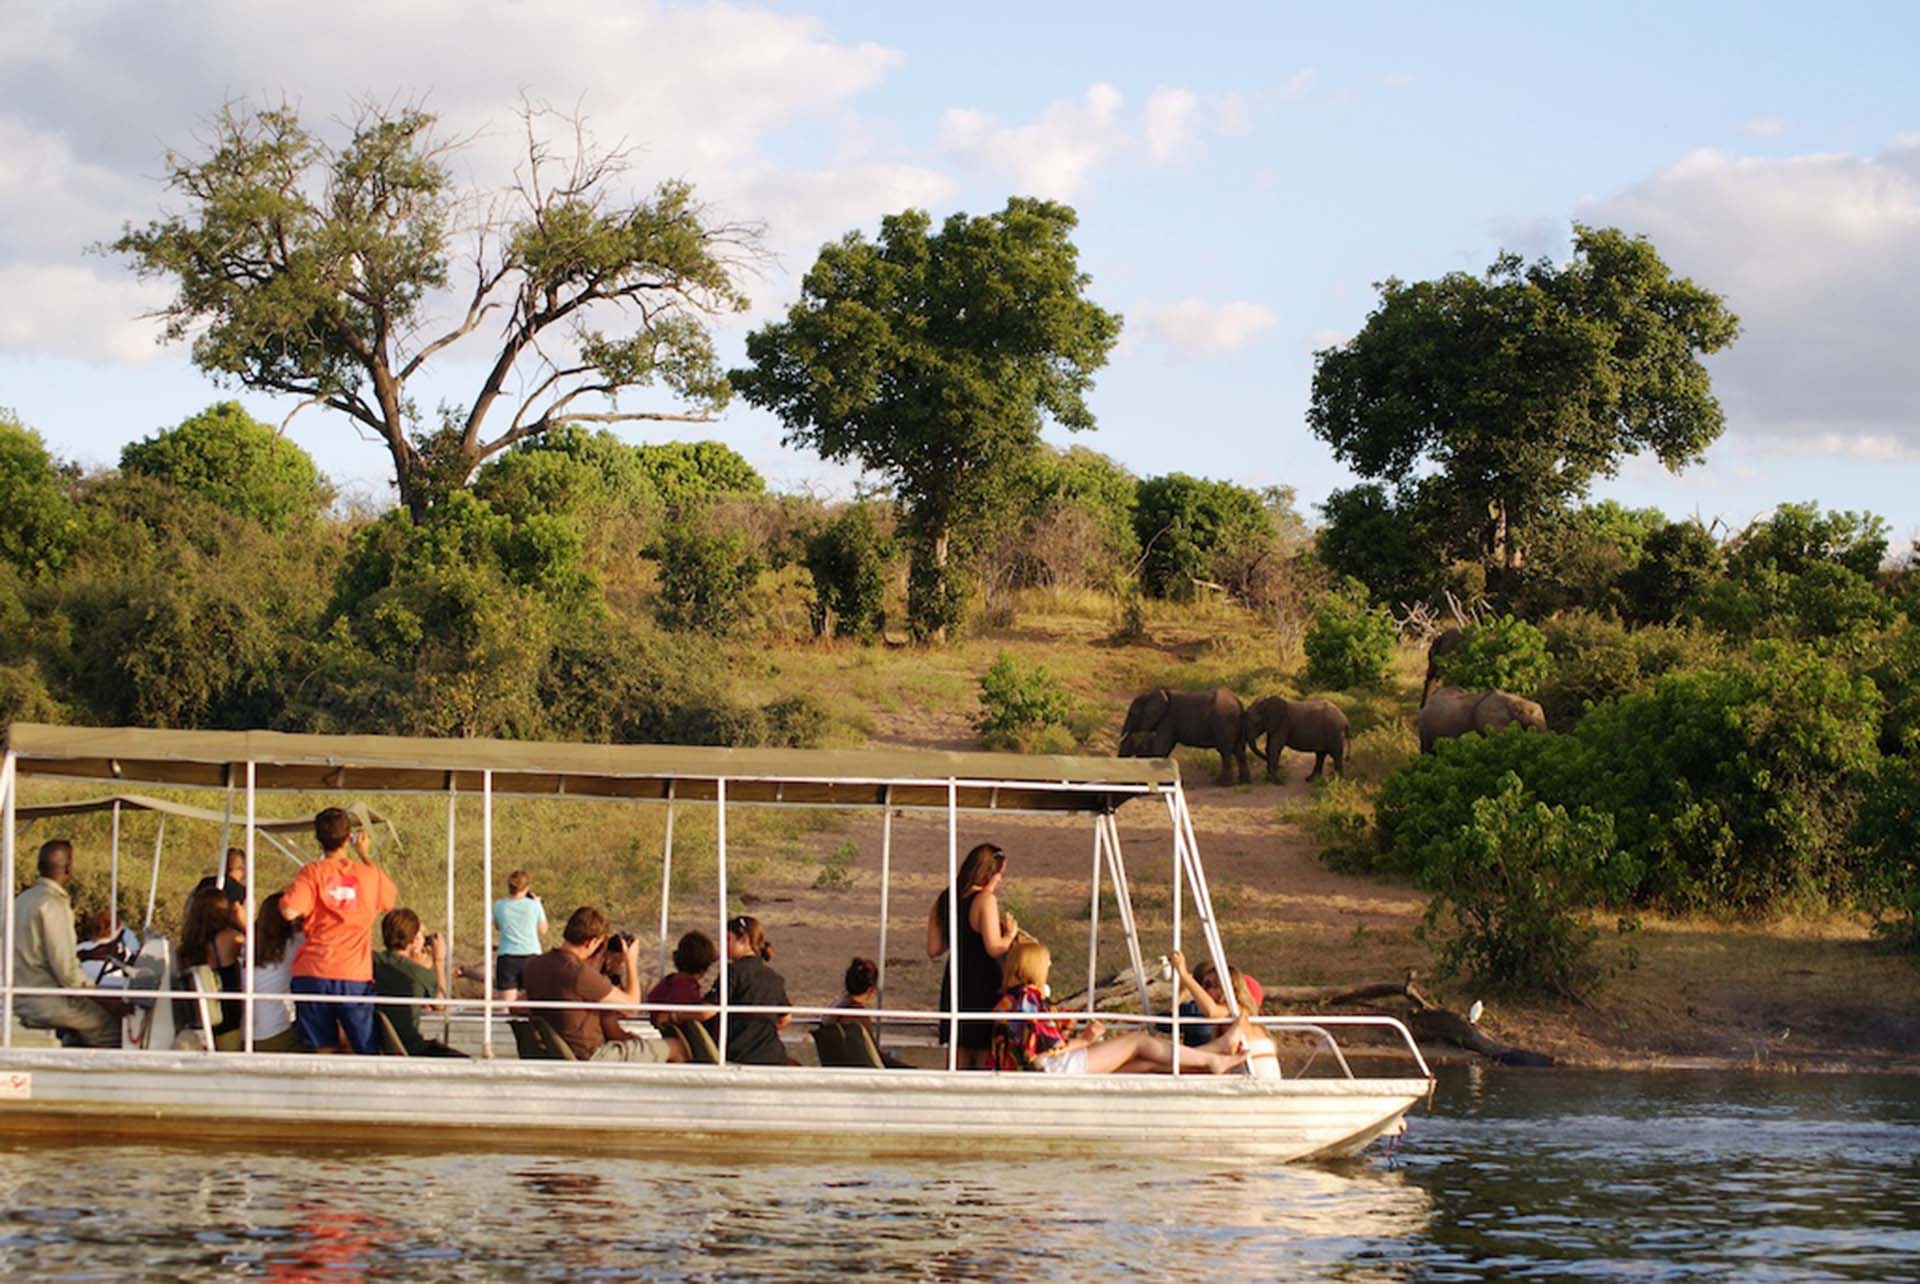 A boat with tourists on Chobe River in Botswana watching elephants